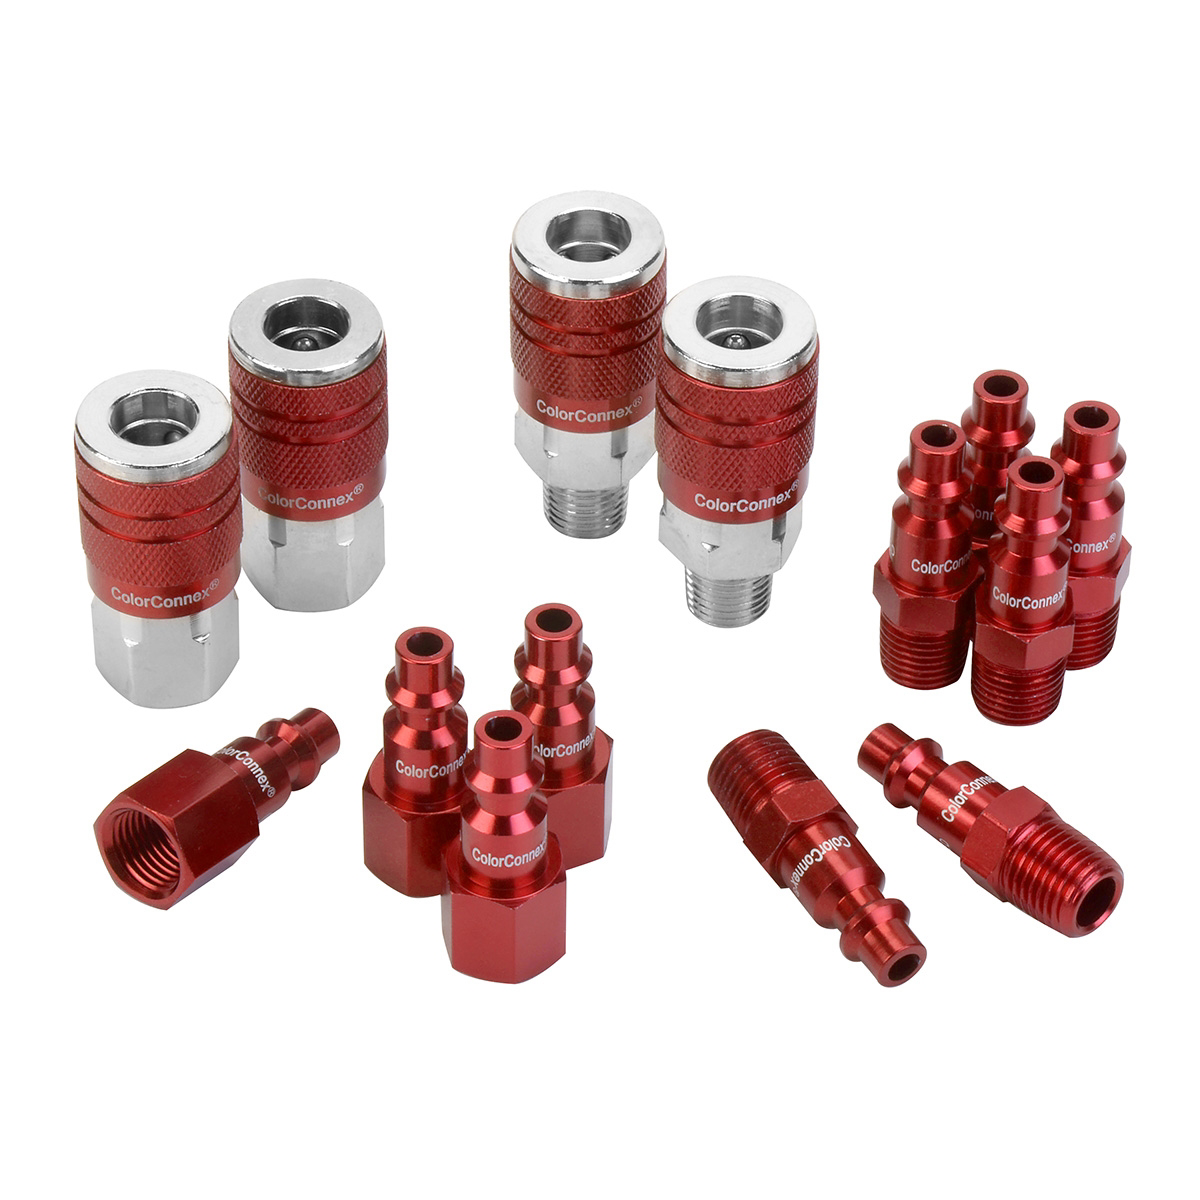 ColorConnex Type D, 1/4 Inch Body Coupler & Plug Kit Red Anodize